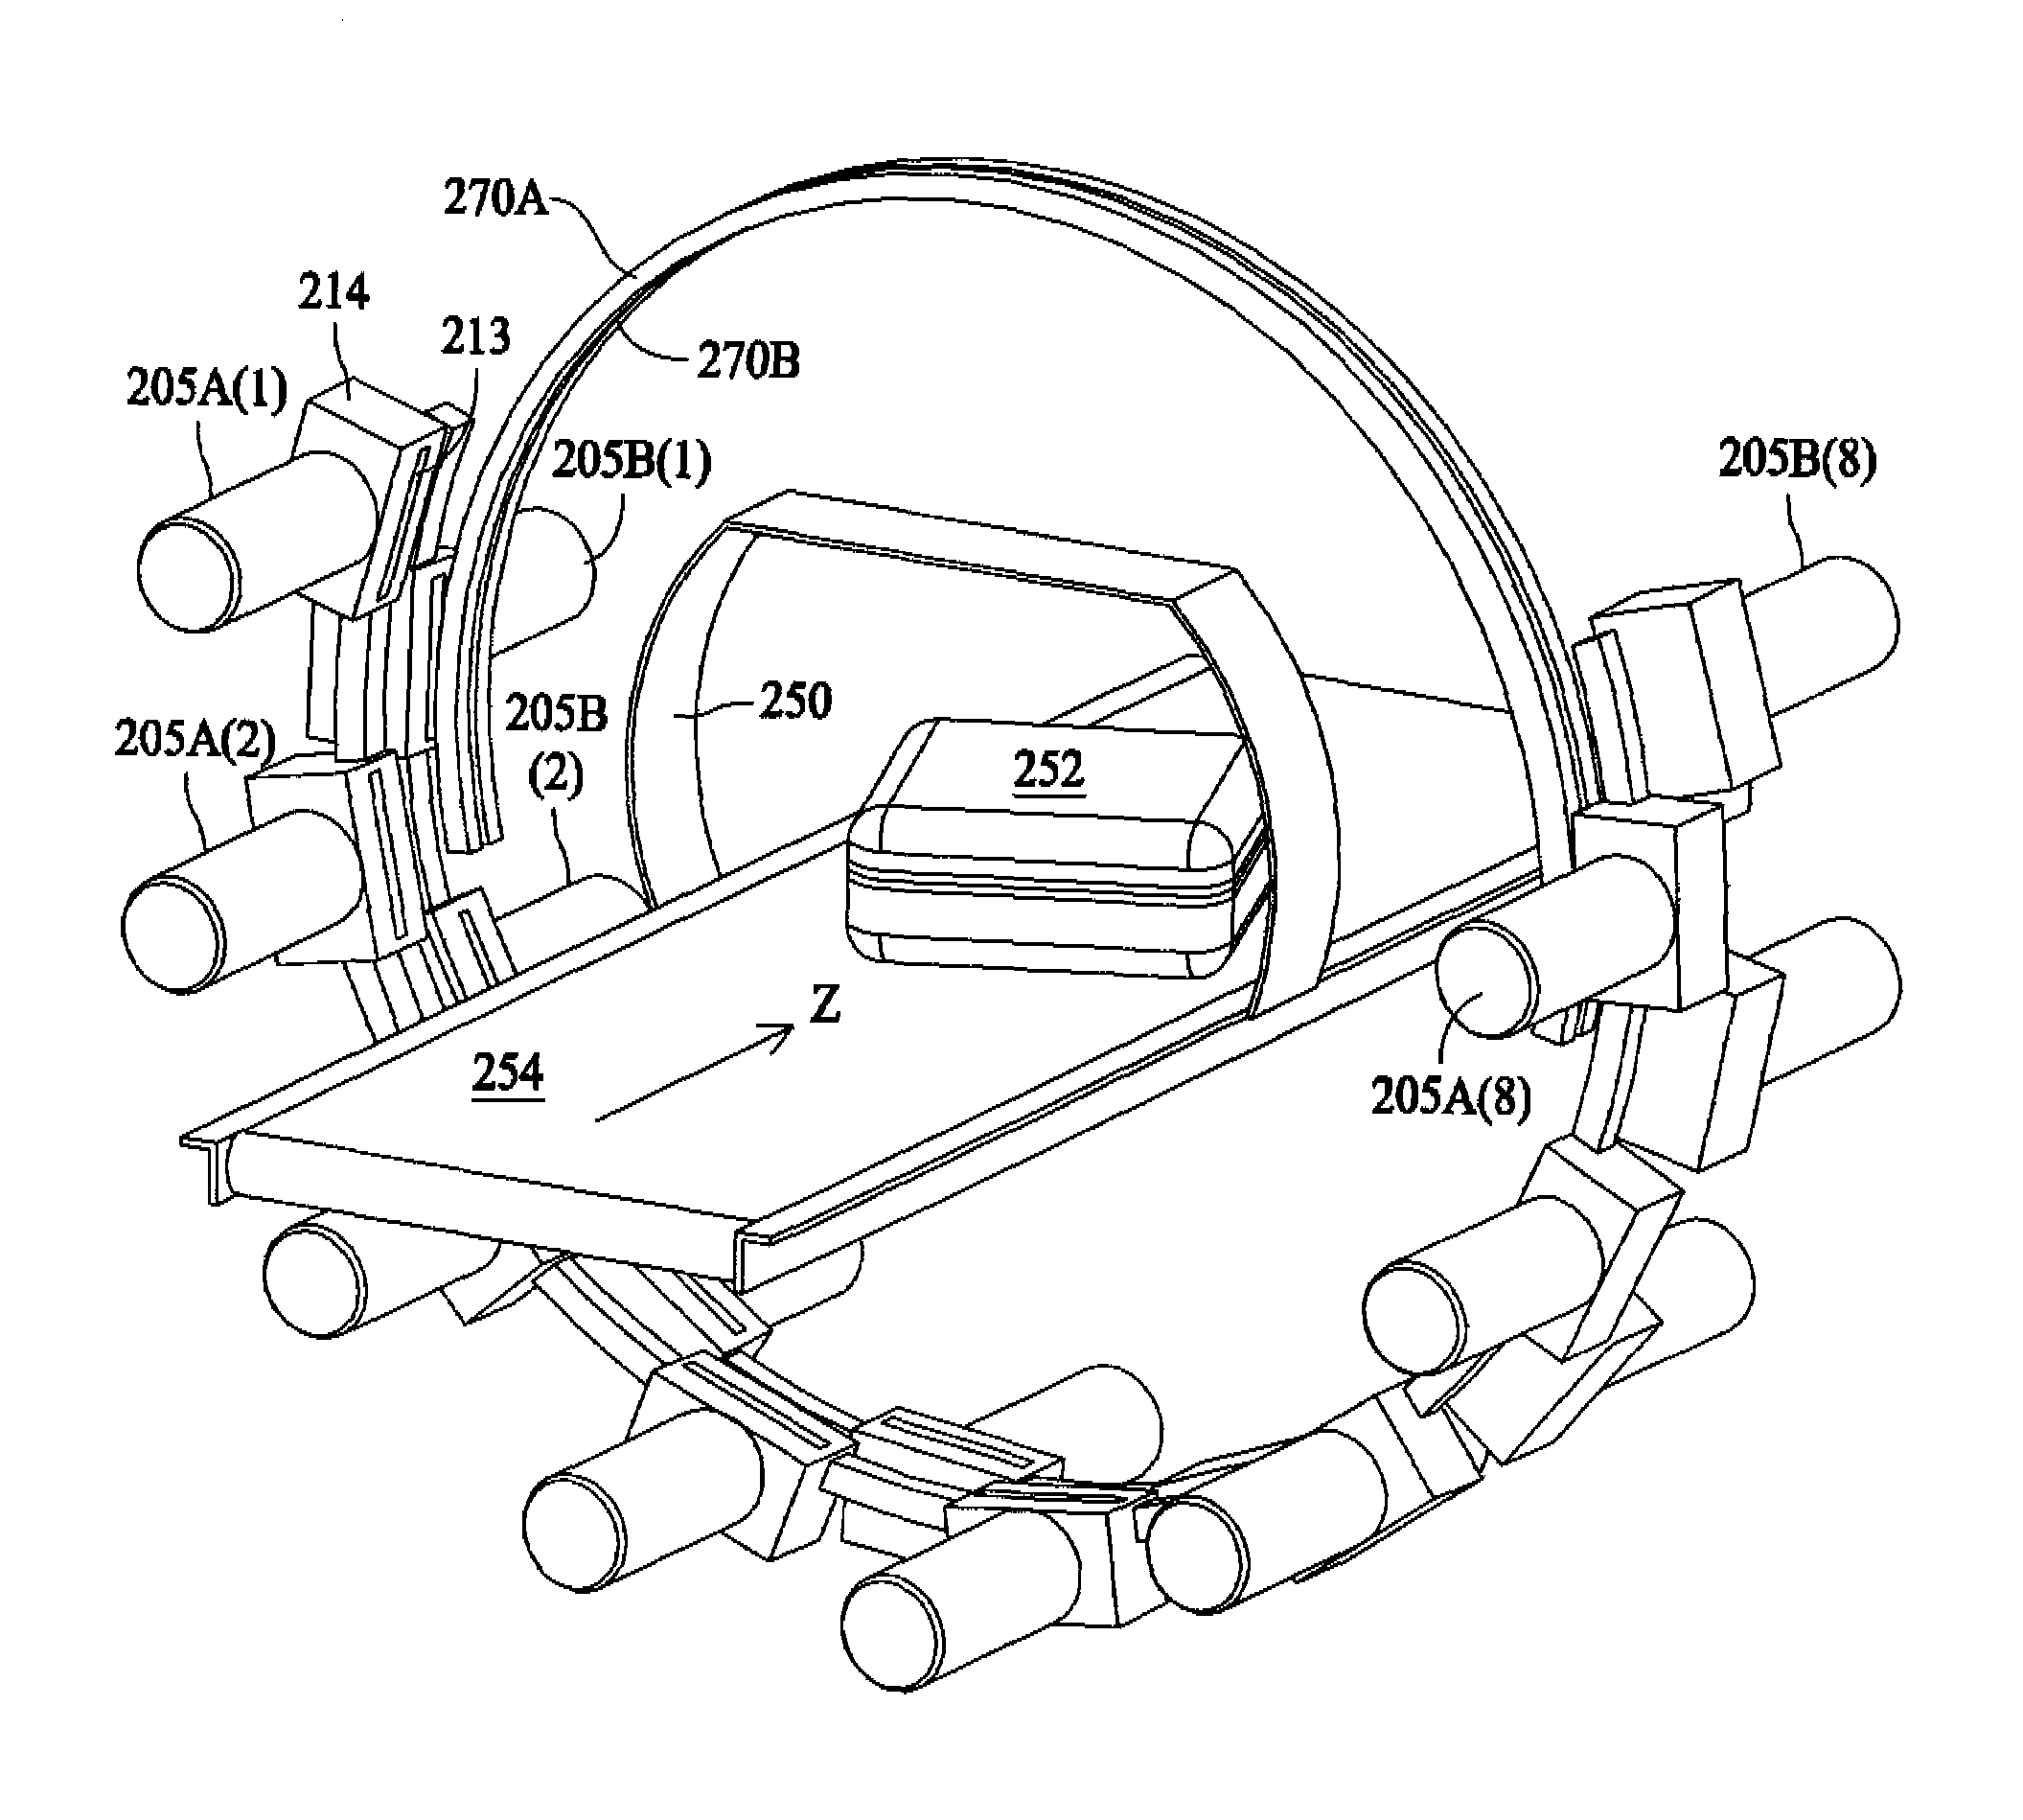 Computed tomographic scanner using rastered x-ray tubes